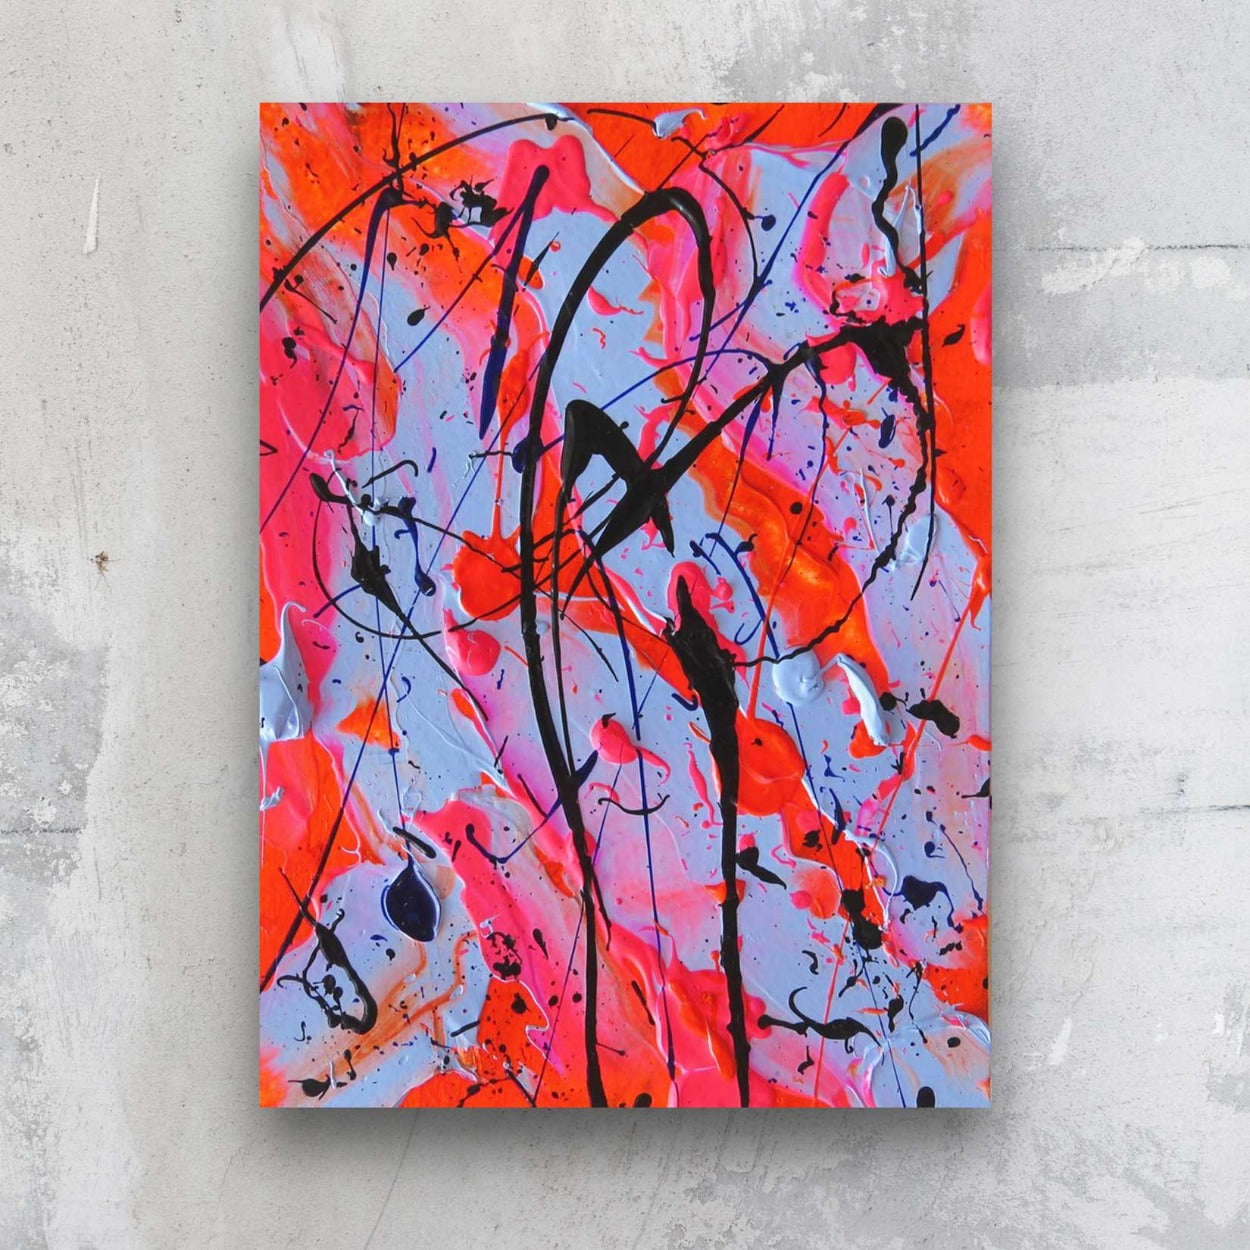 Little Luxuries III, abstract calligraphy painting on paper in neon reds, mauve blues and black calligraphic marks. Abstract artist, Bridget Bradley